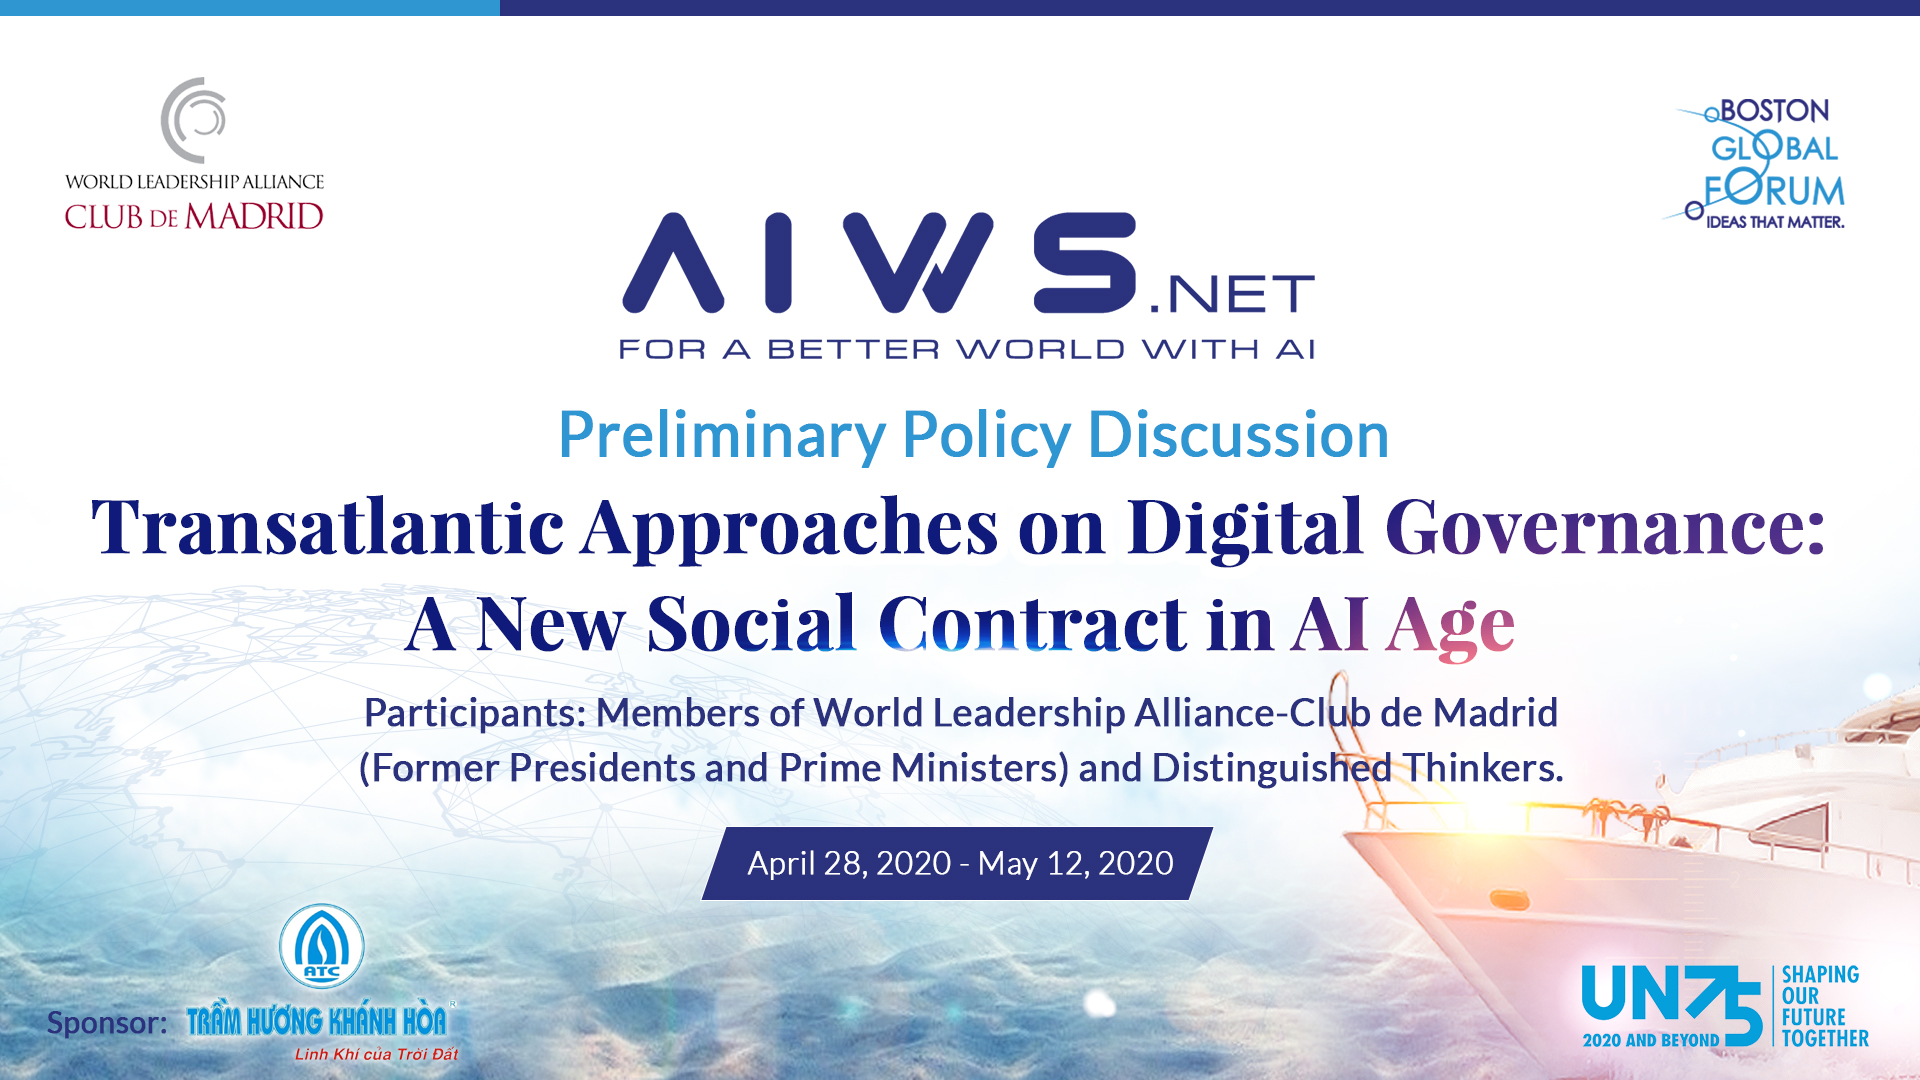 A New Social Contract in the Age of AI: Protection of Privacy Rights in the Times of COVID-19